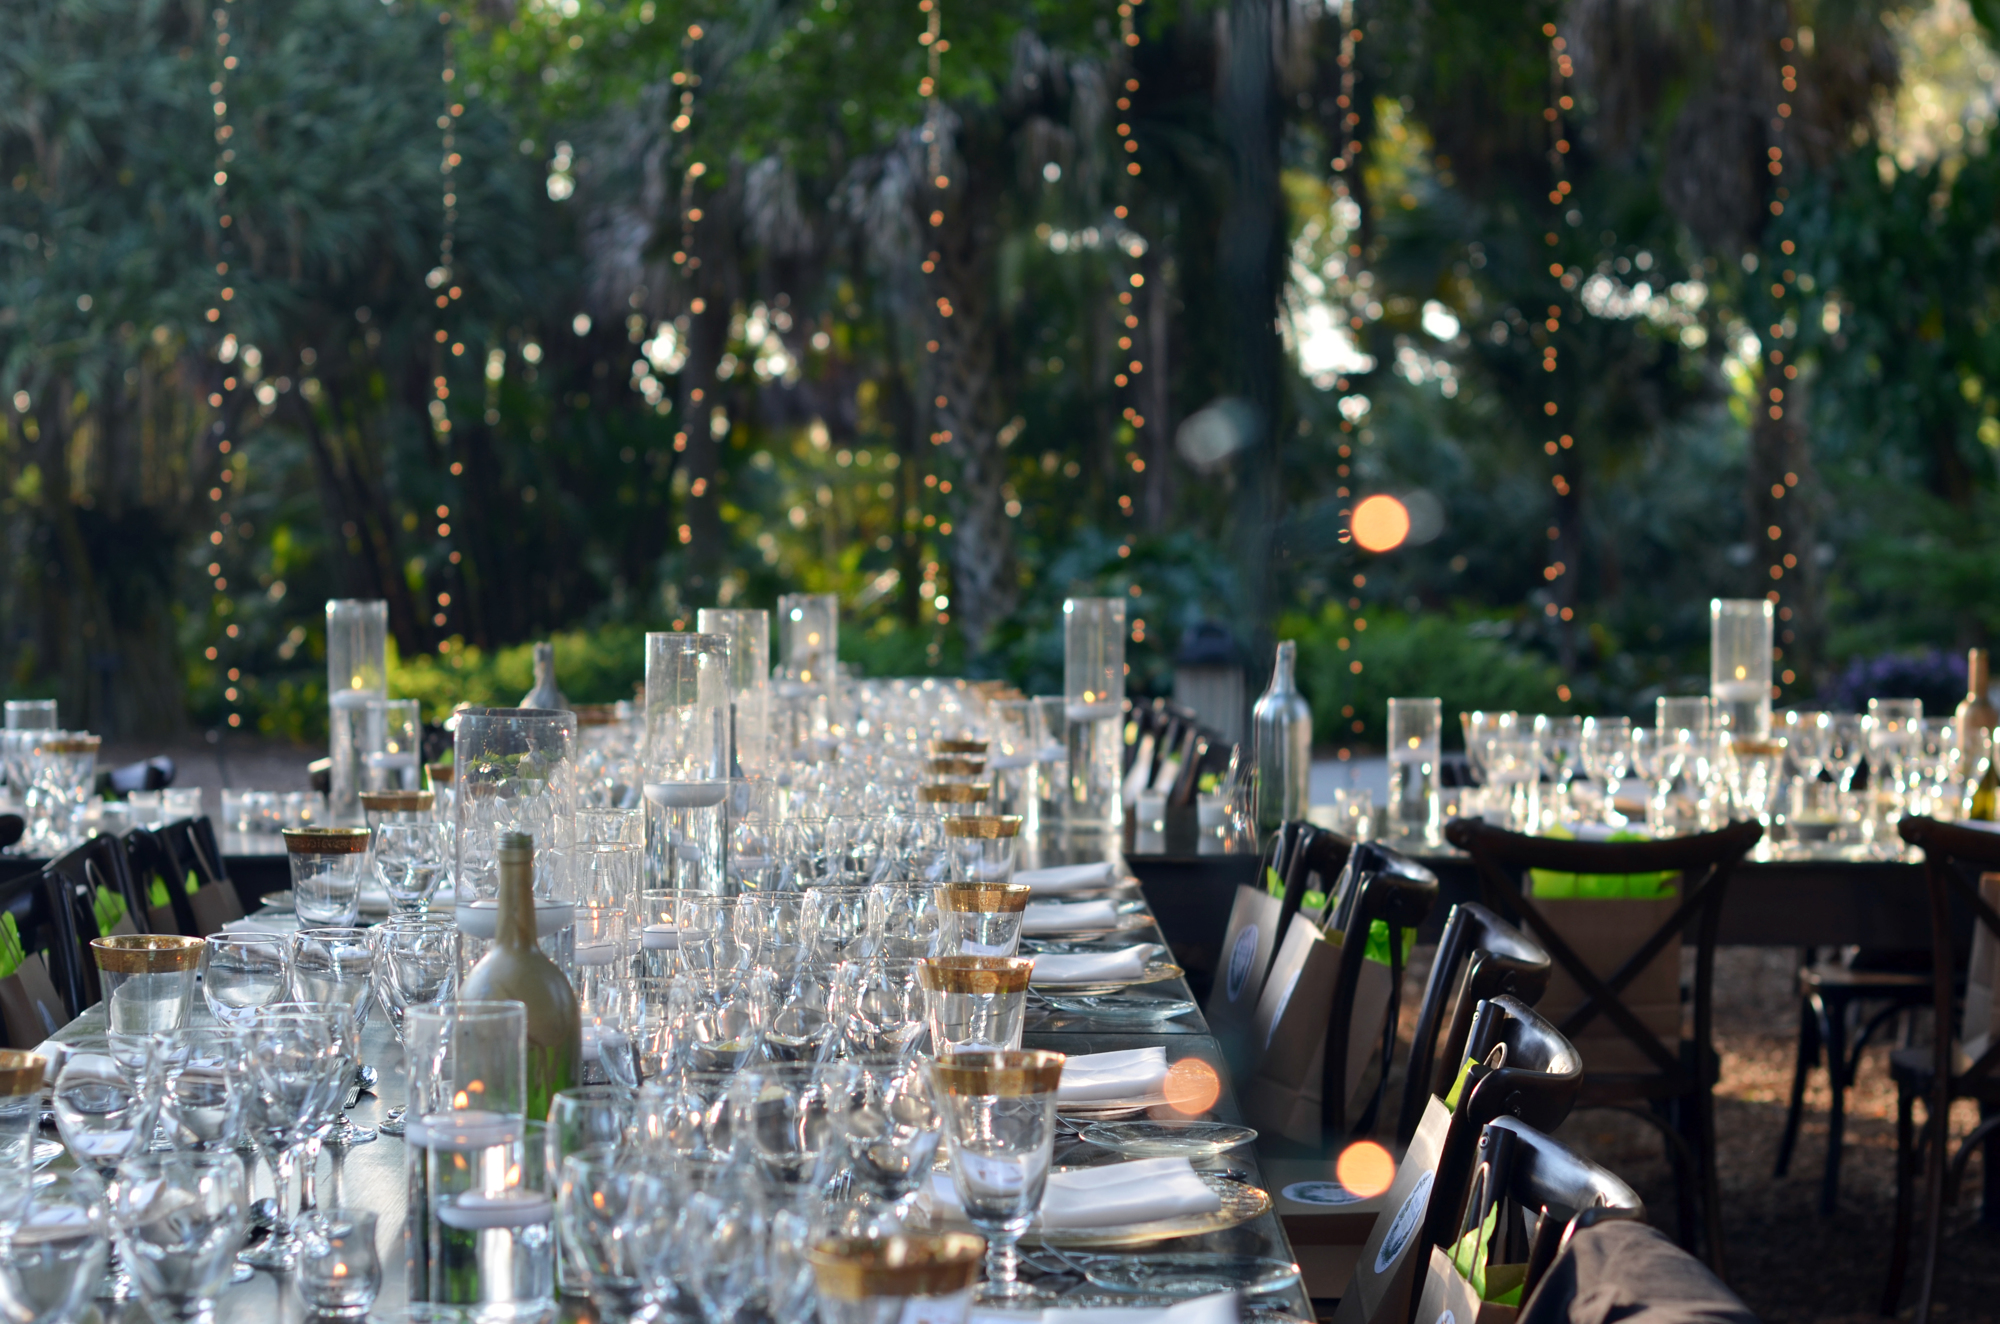 Nora and Billy Johnson along with Jenny and Ken Pendery will host the first annual Selby Wine Dinner on Thursday, April 29, at Marie Selby Botanical Gardens.